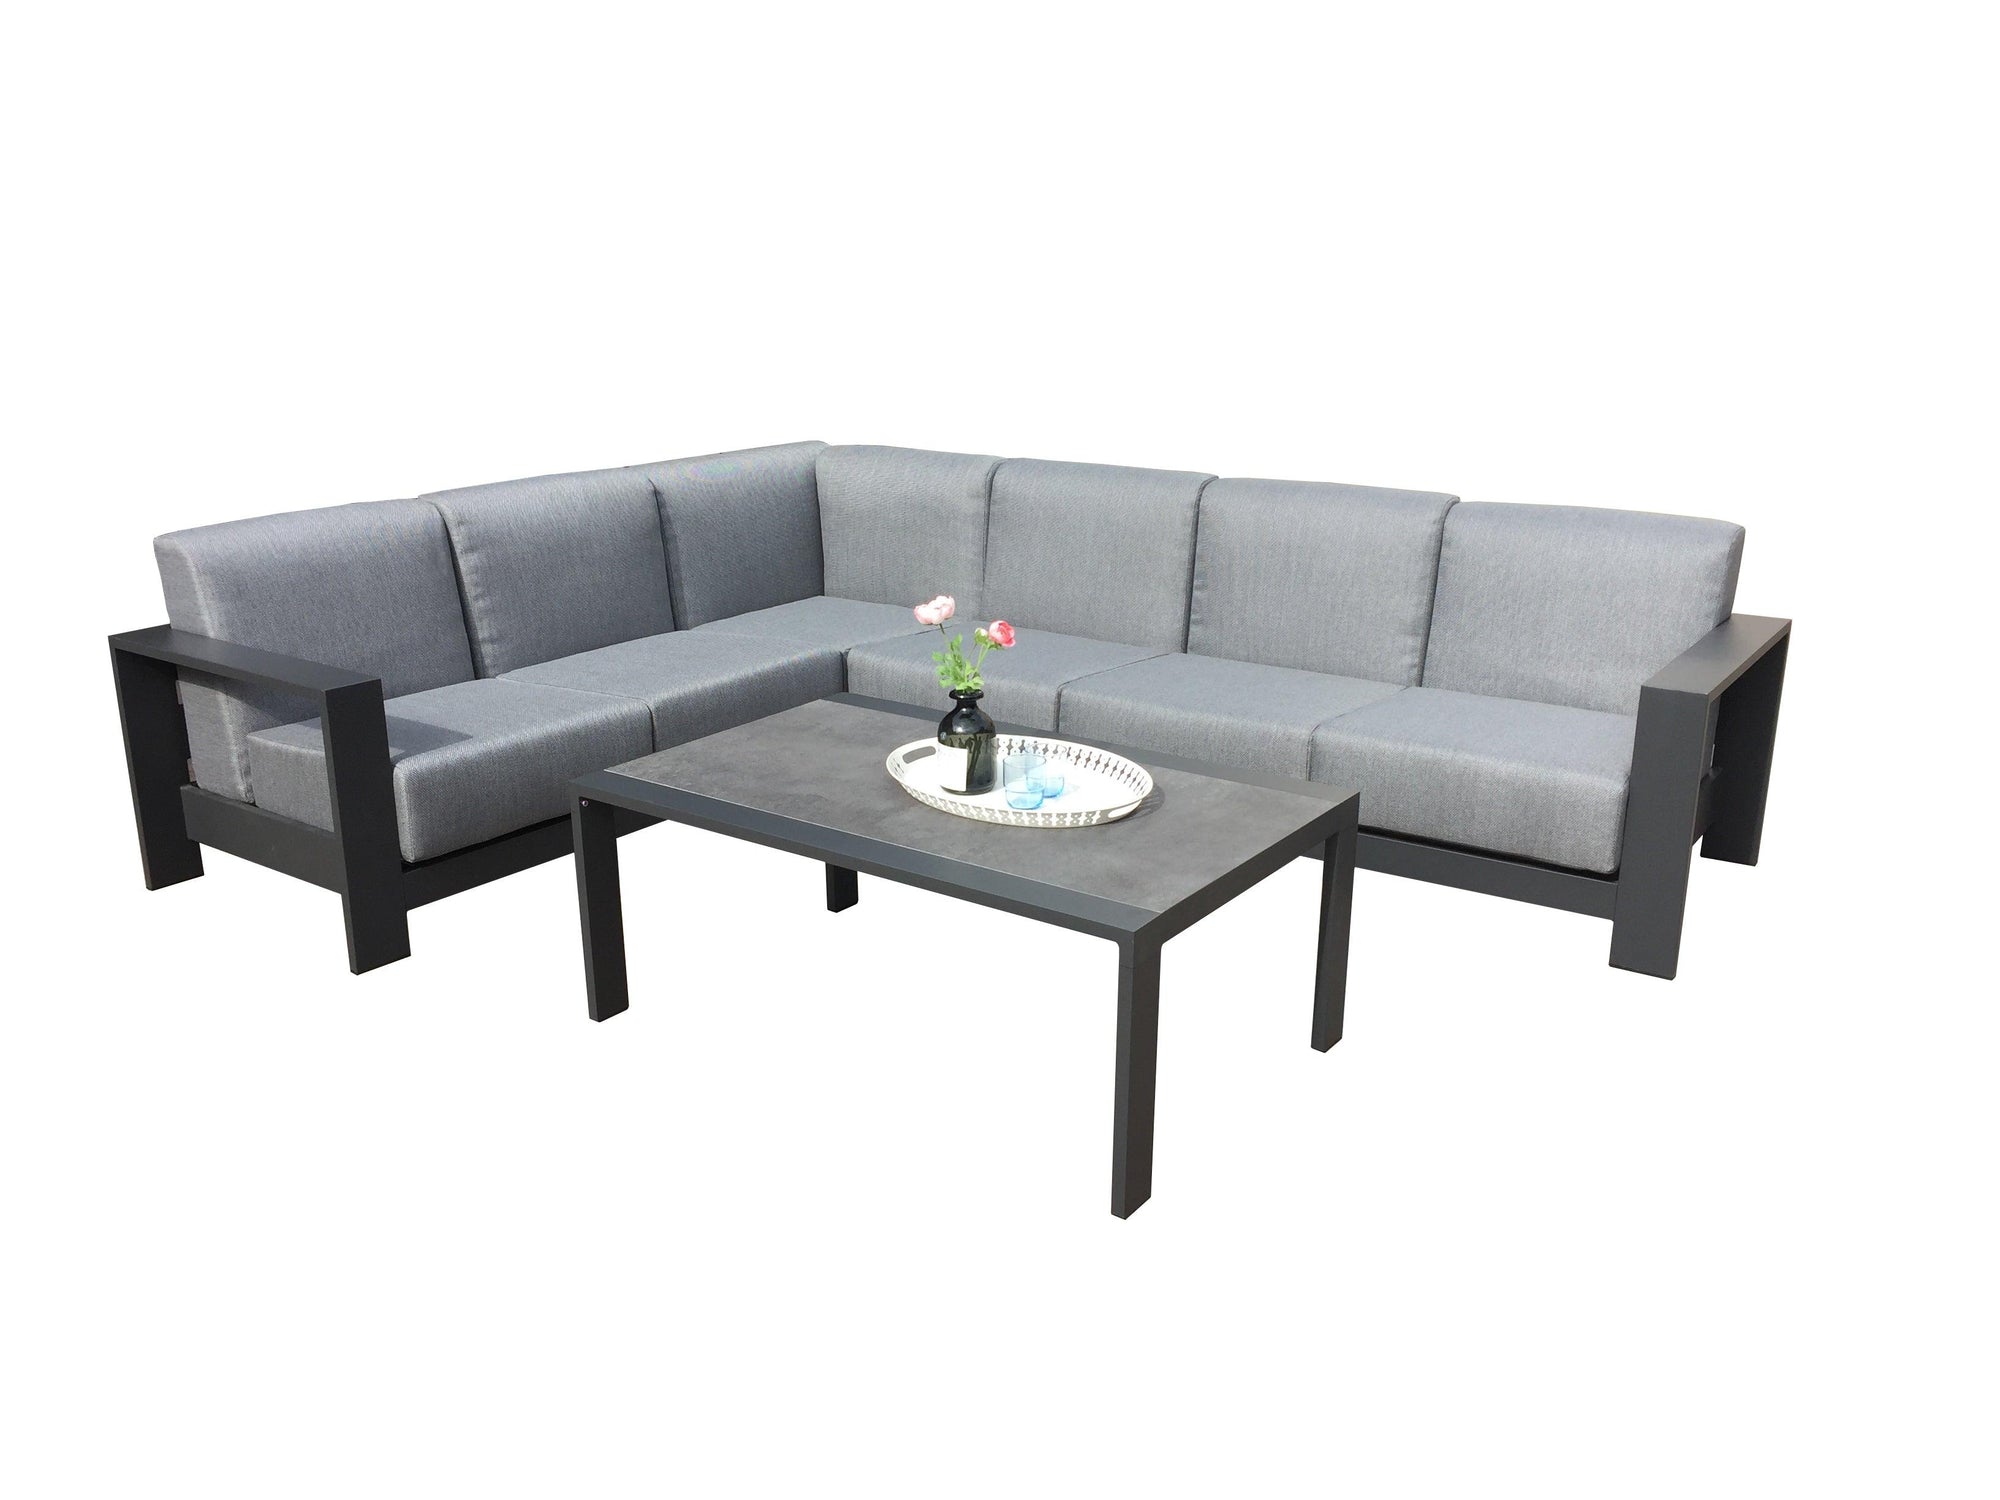 Elevate your deep seating with the stunning and modern four-piece sectional. With a sleek black frame and custom-made grey cushions, this set brings elegance and additional serving space with the complementing coffee table. 